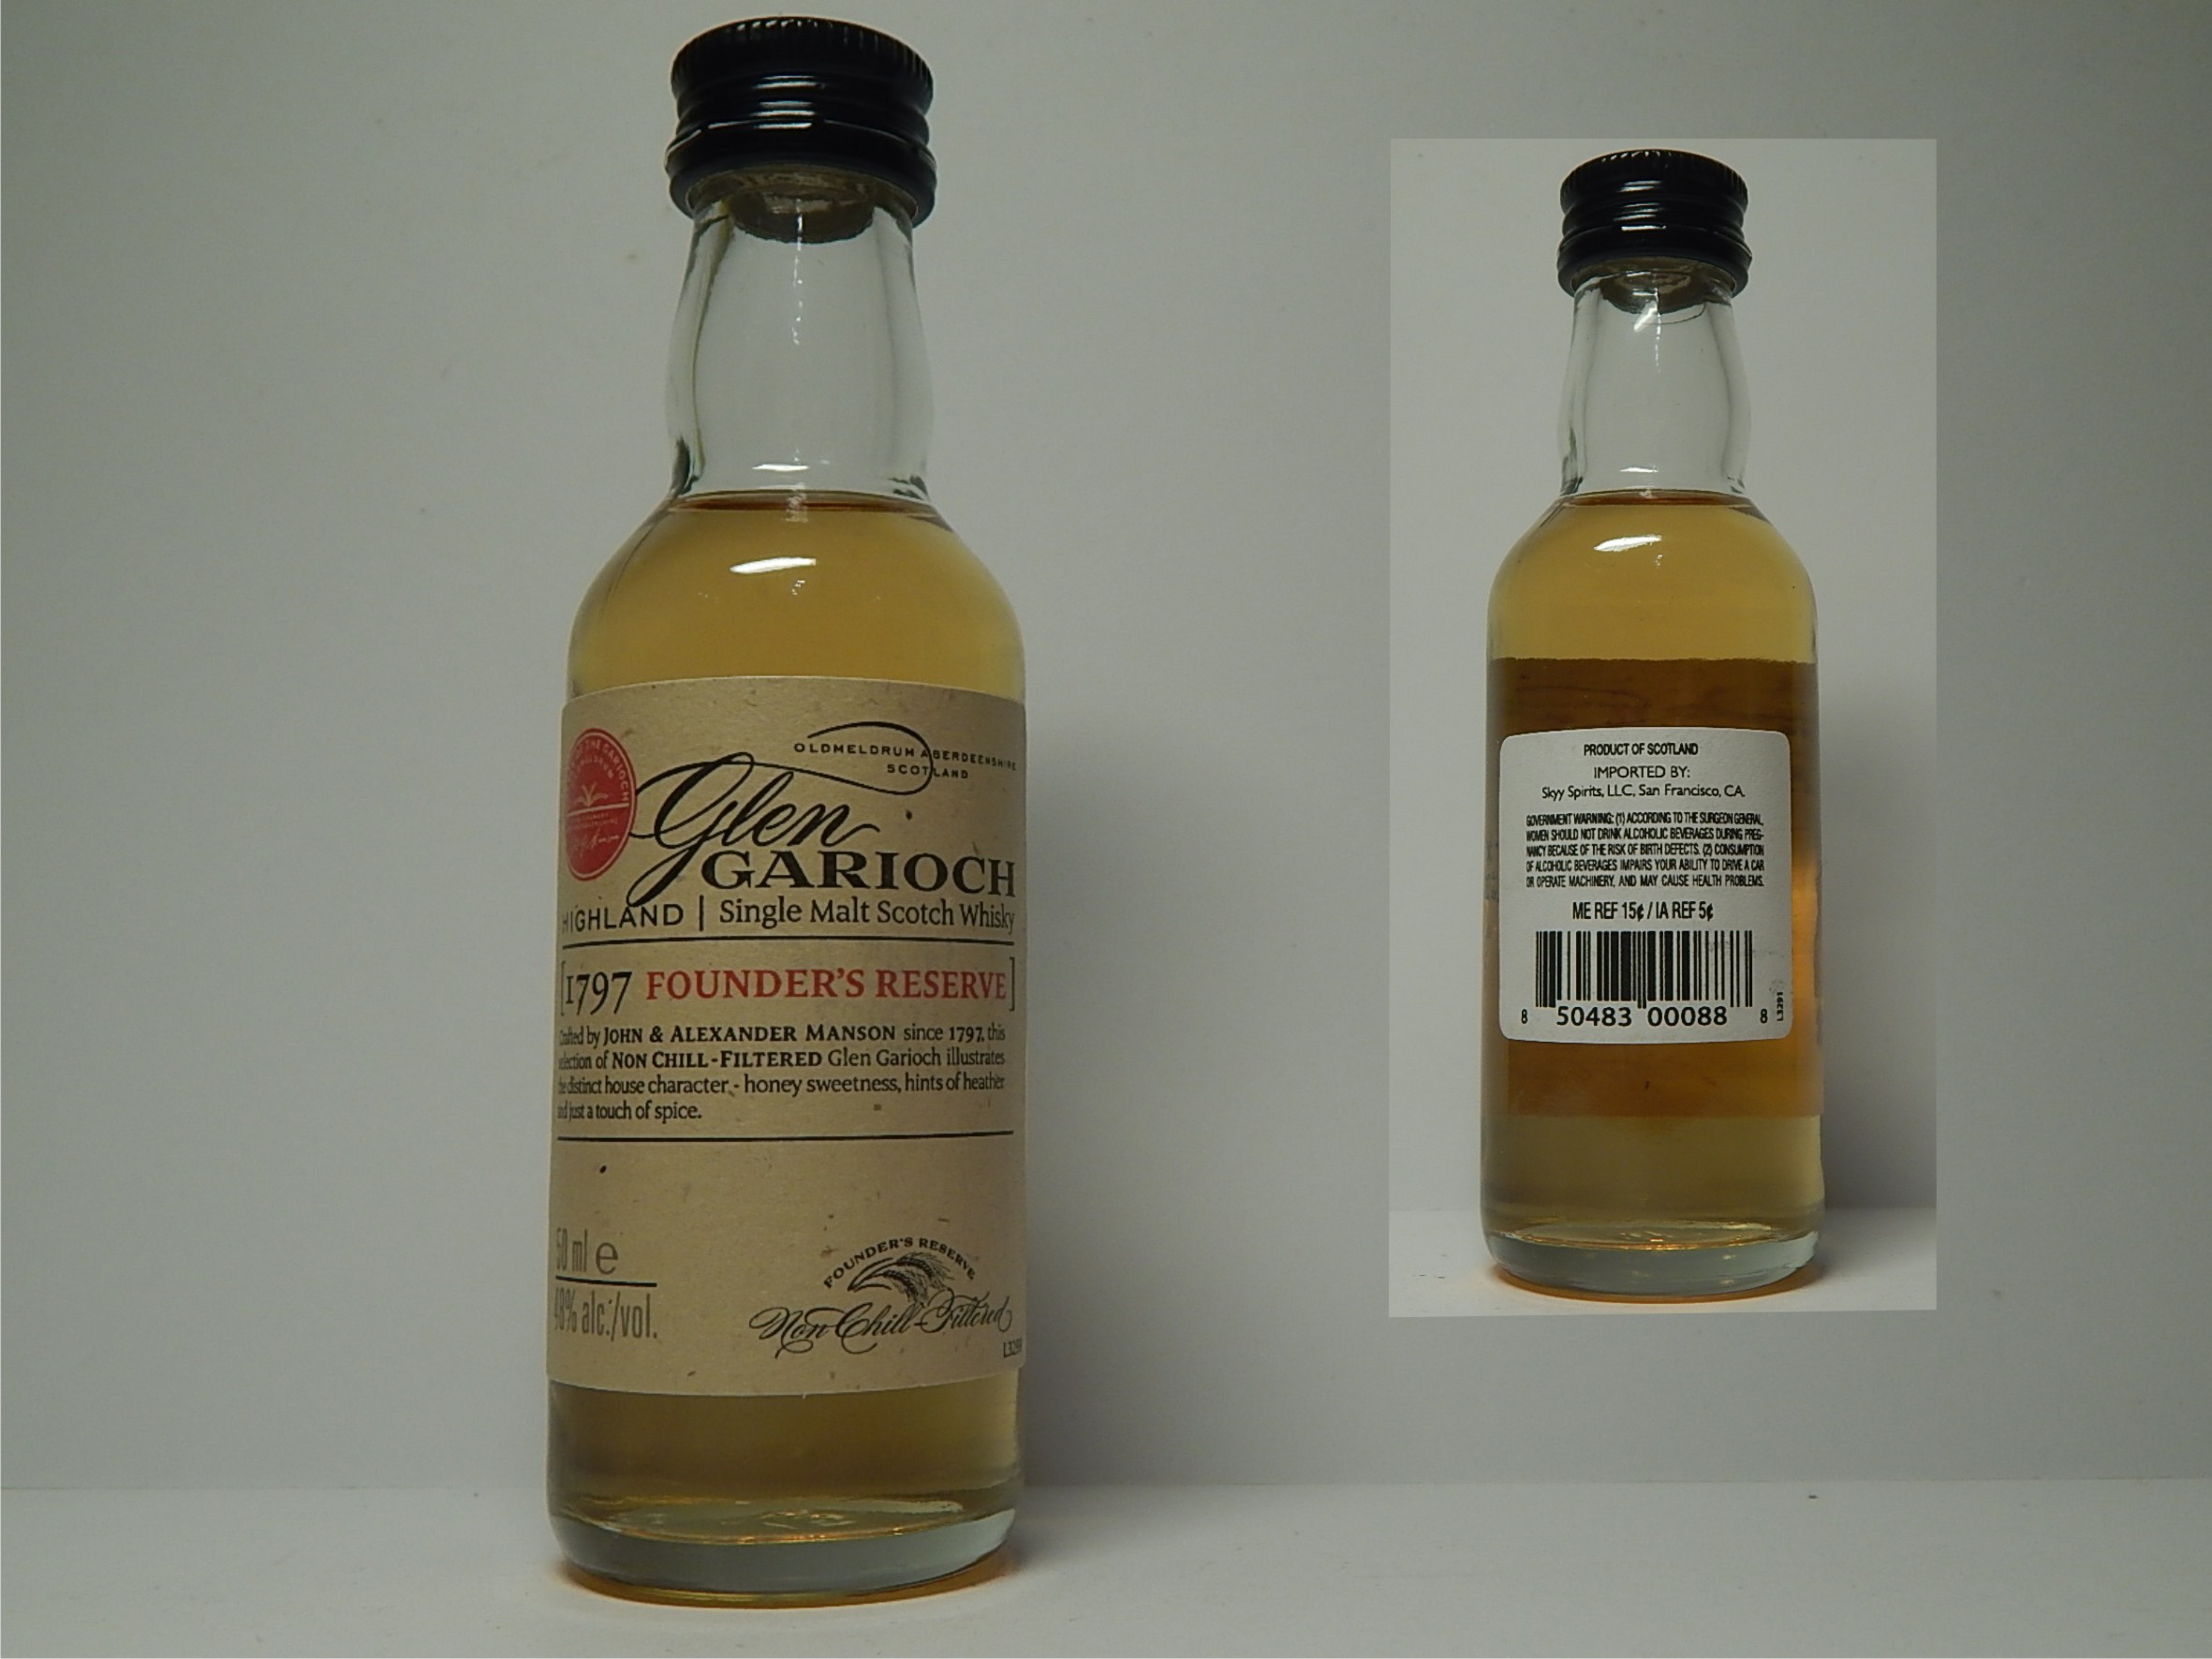 Founder´s Reserve HSMSW 50mle 48%alc./vol. "USA"